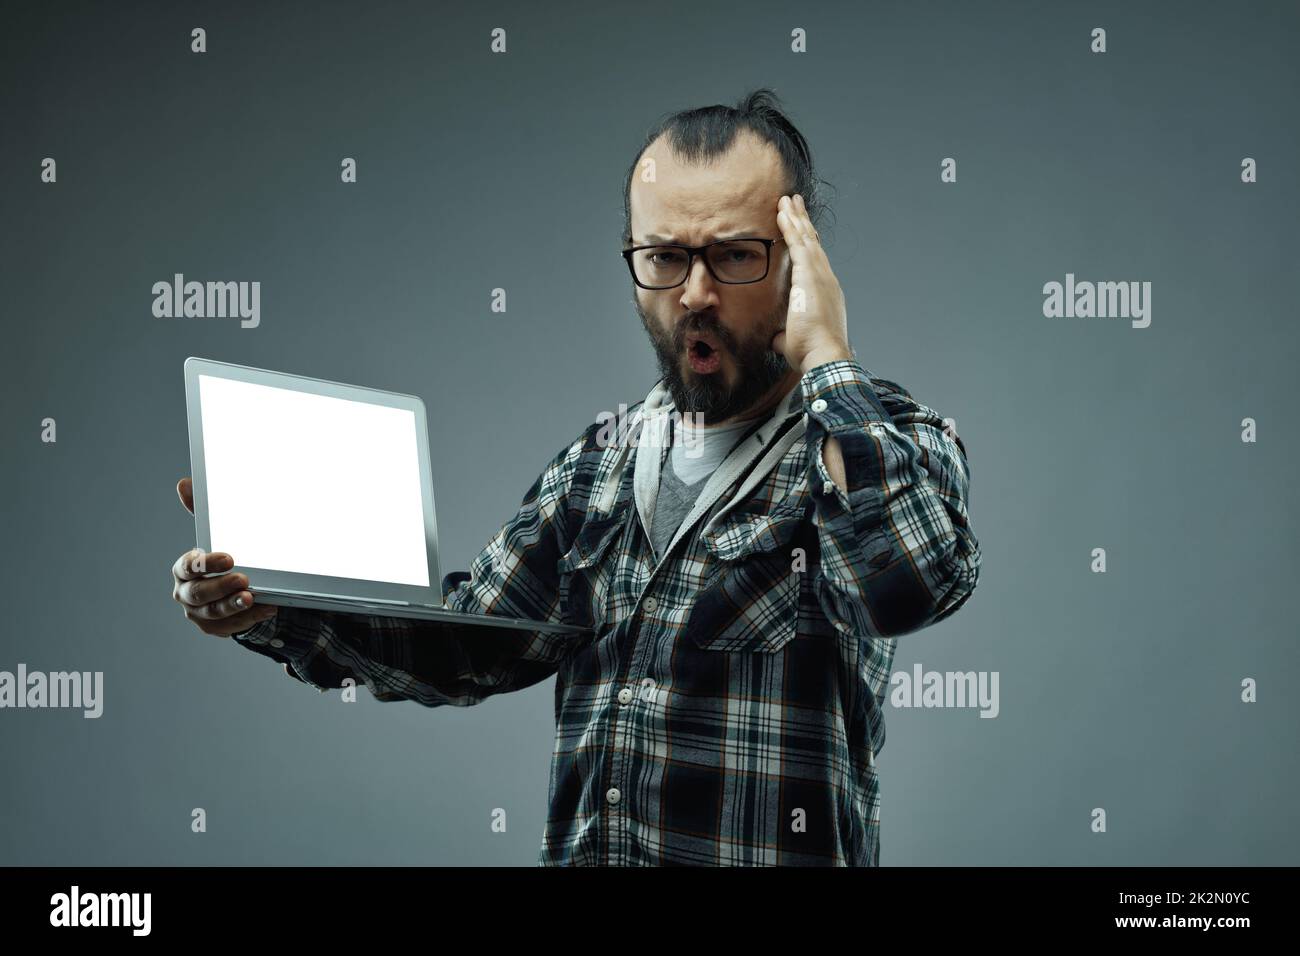 Man with an amazed facial expression while holding a laptop Stock Photo